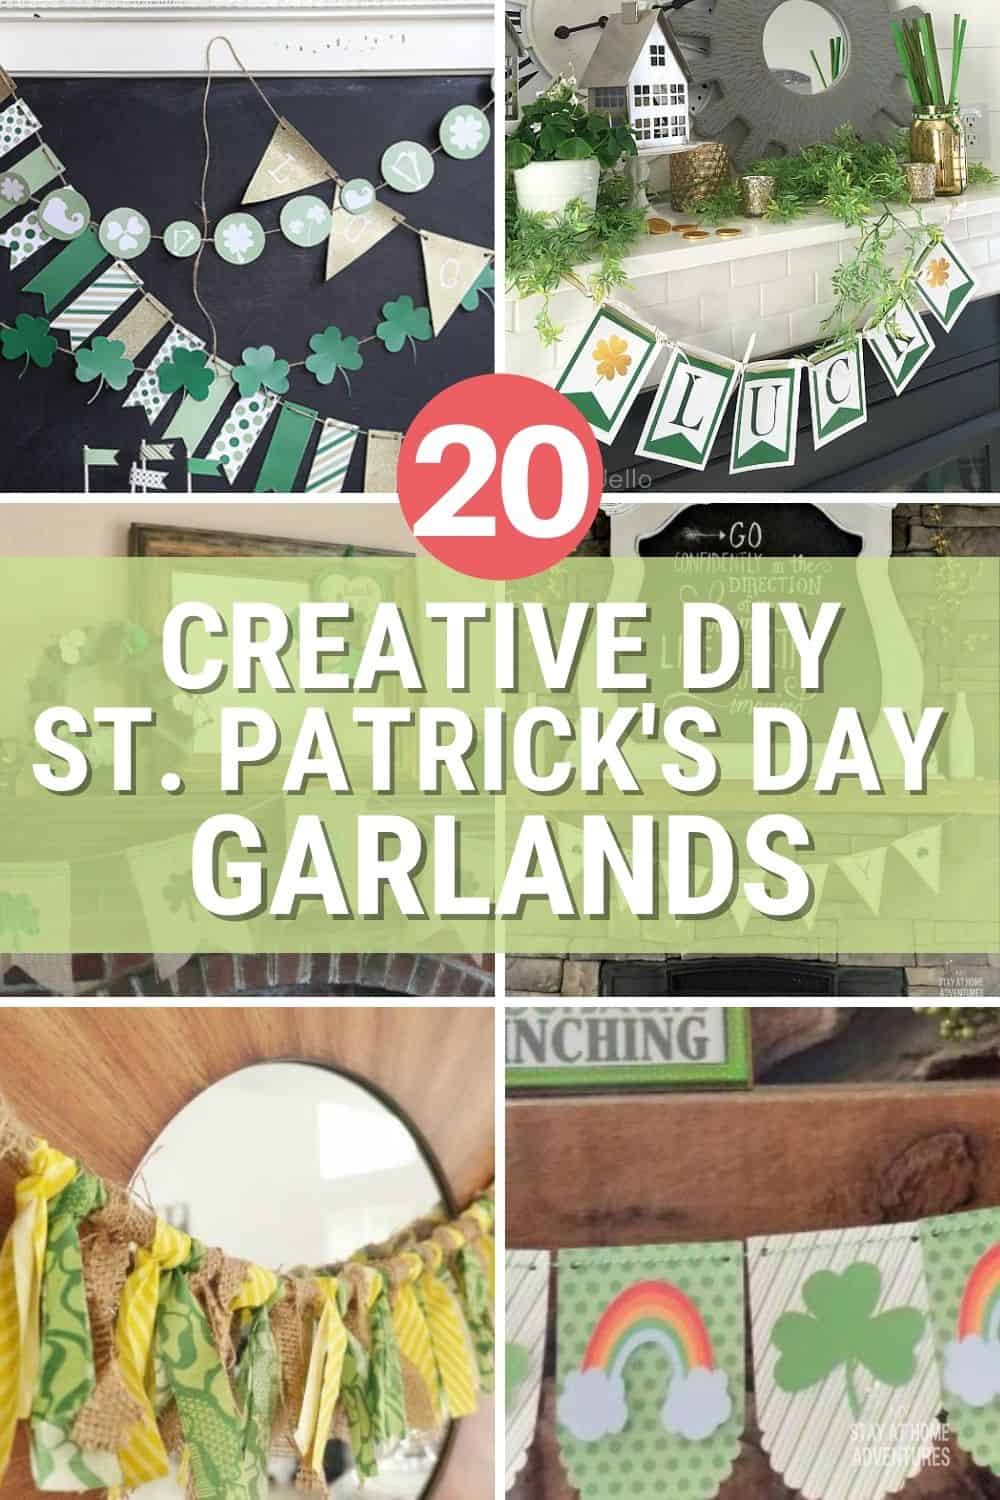 St Patrick's Day is just around the corner, and if you are looking for a DIY Garland, we got 20 Creative DIY St. Patrick's Day Garlands. via @mystayathome